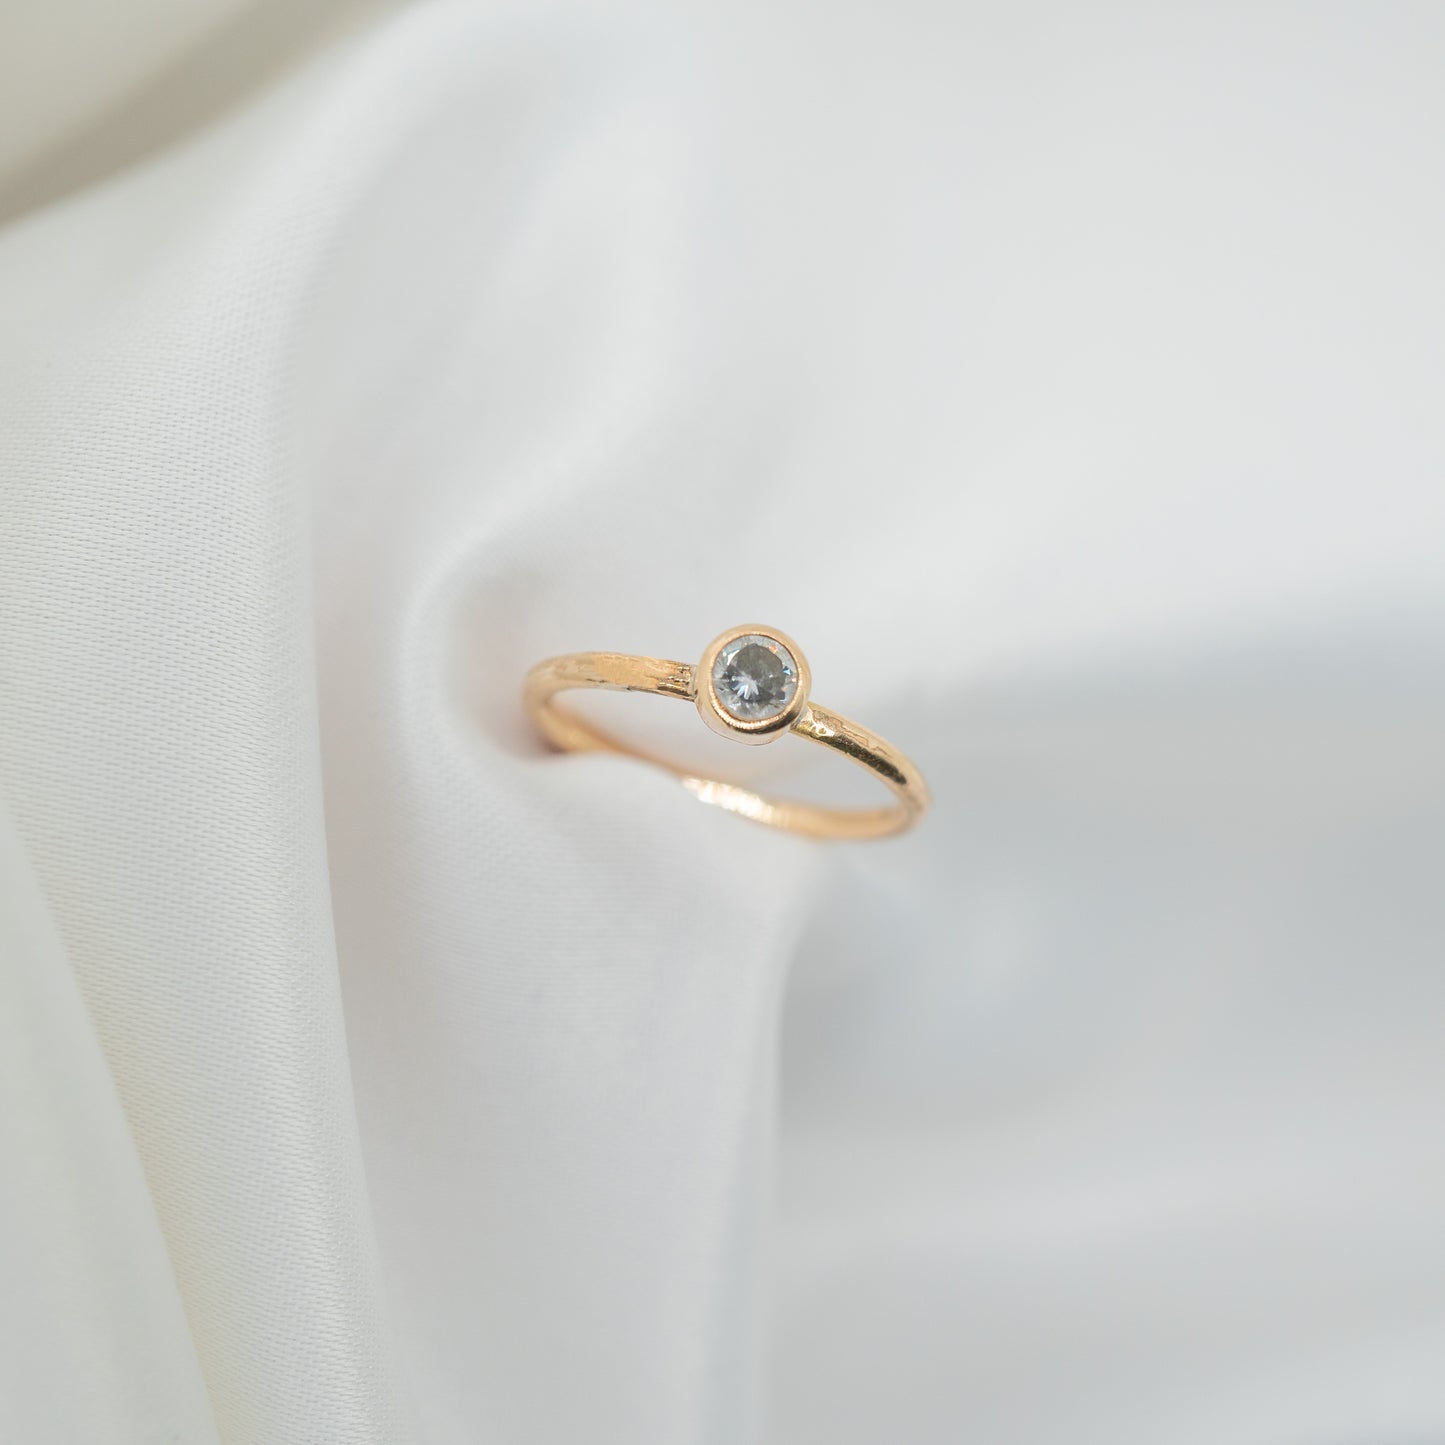 Gold Filled Cubic Zirconia Tube Ring - shot on white - aerial view